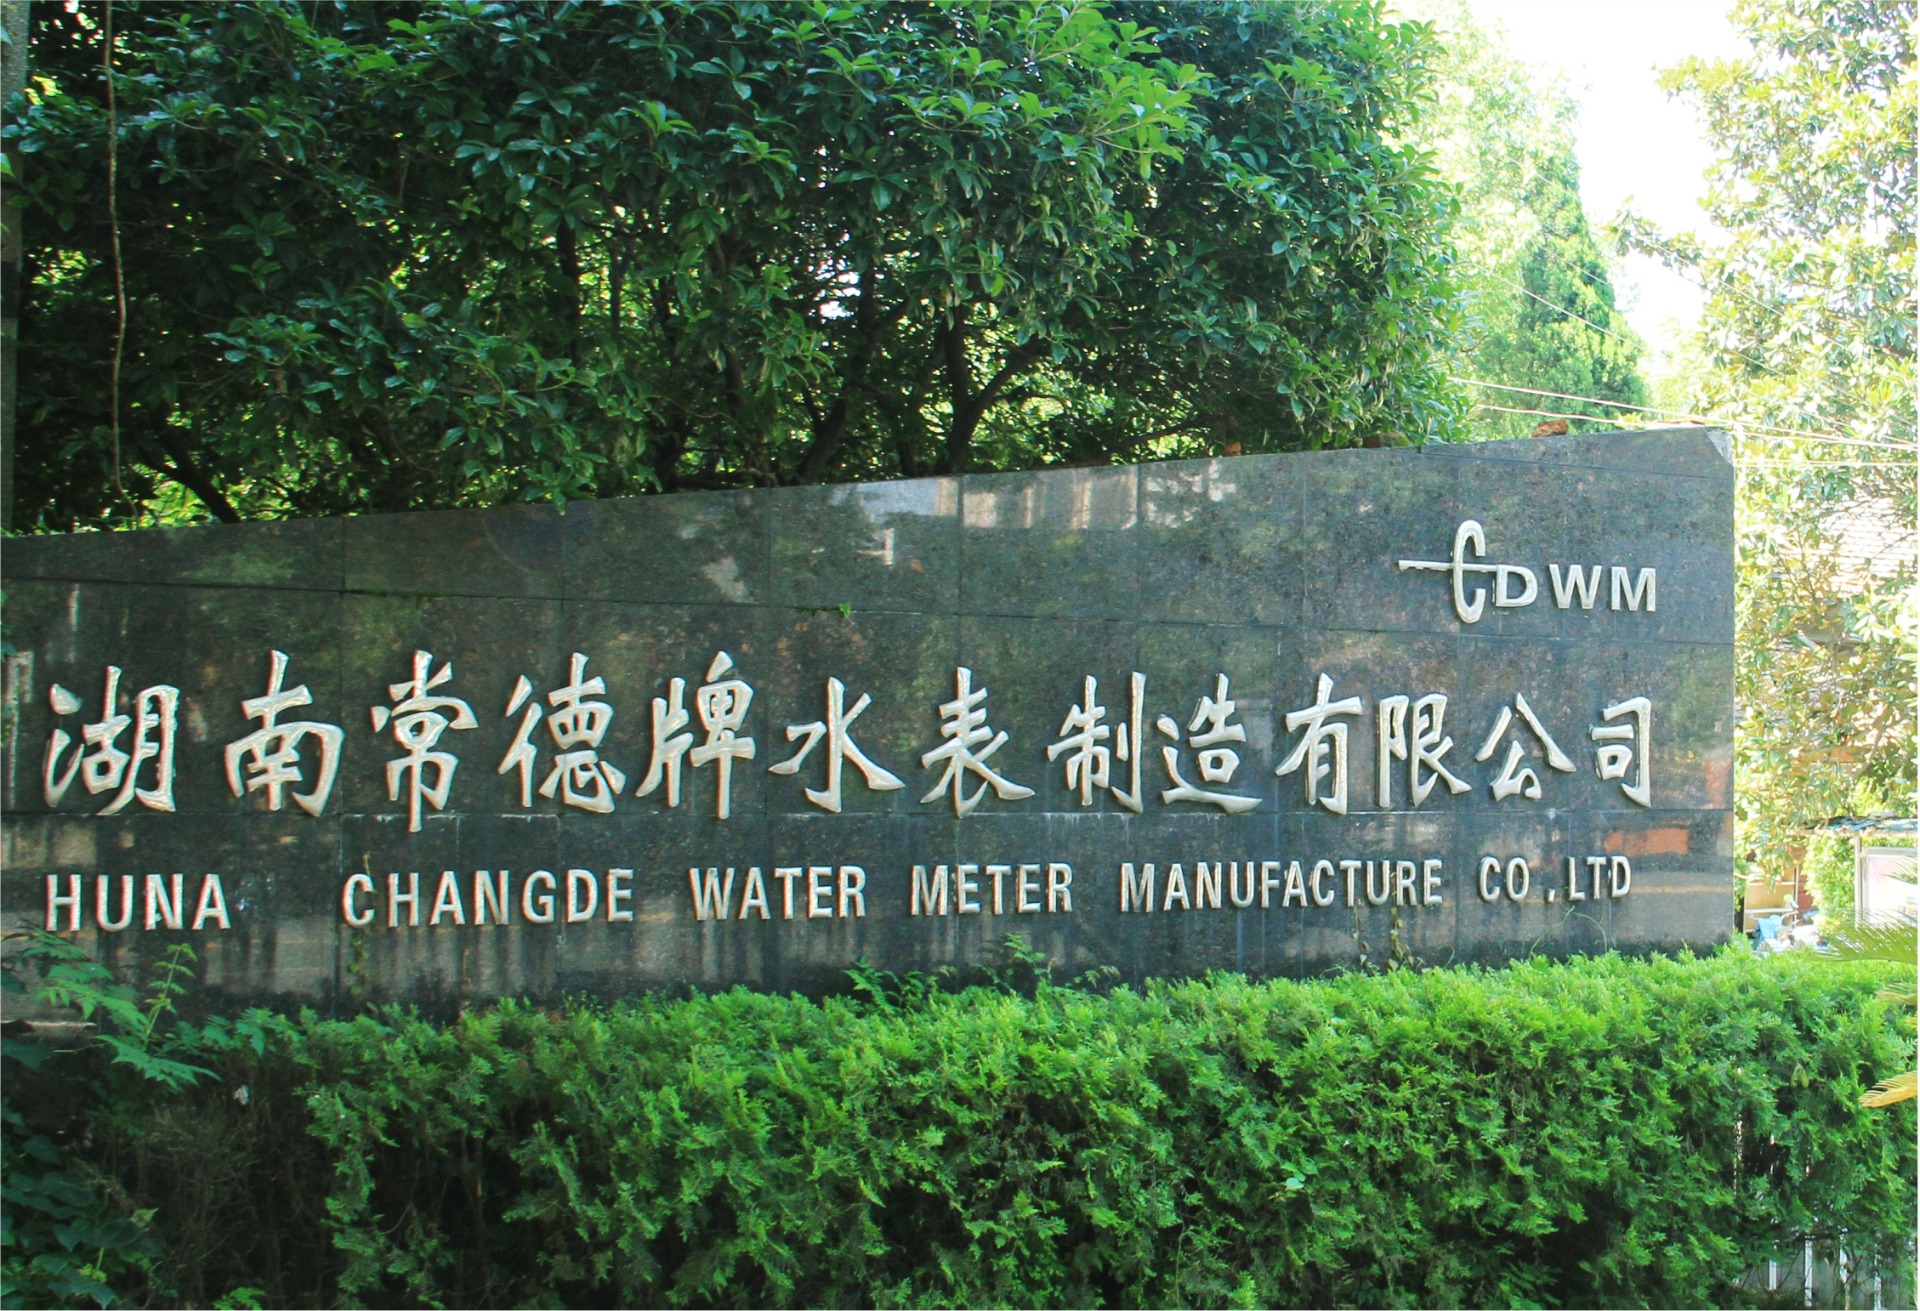 Become a national enterprise and change its name to Changde instrument Factory.